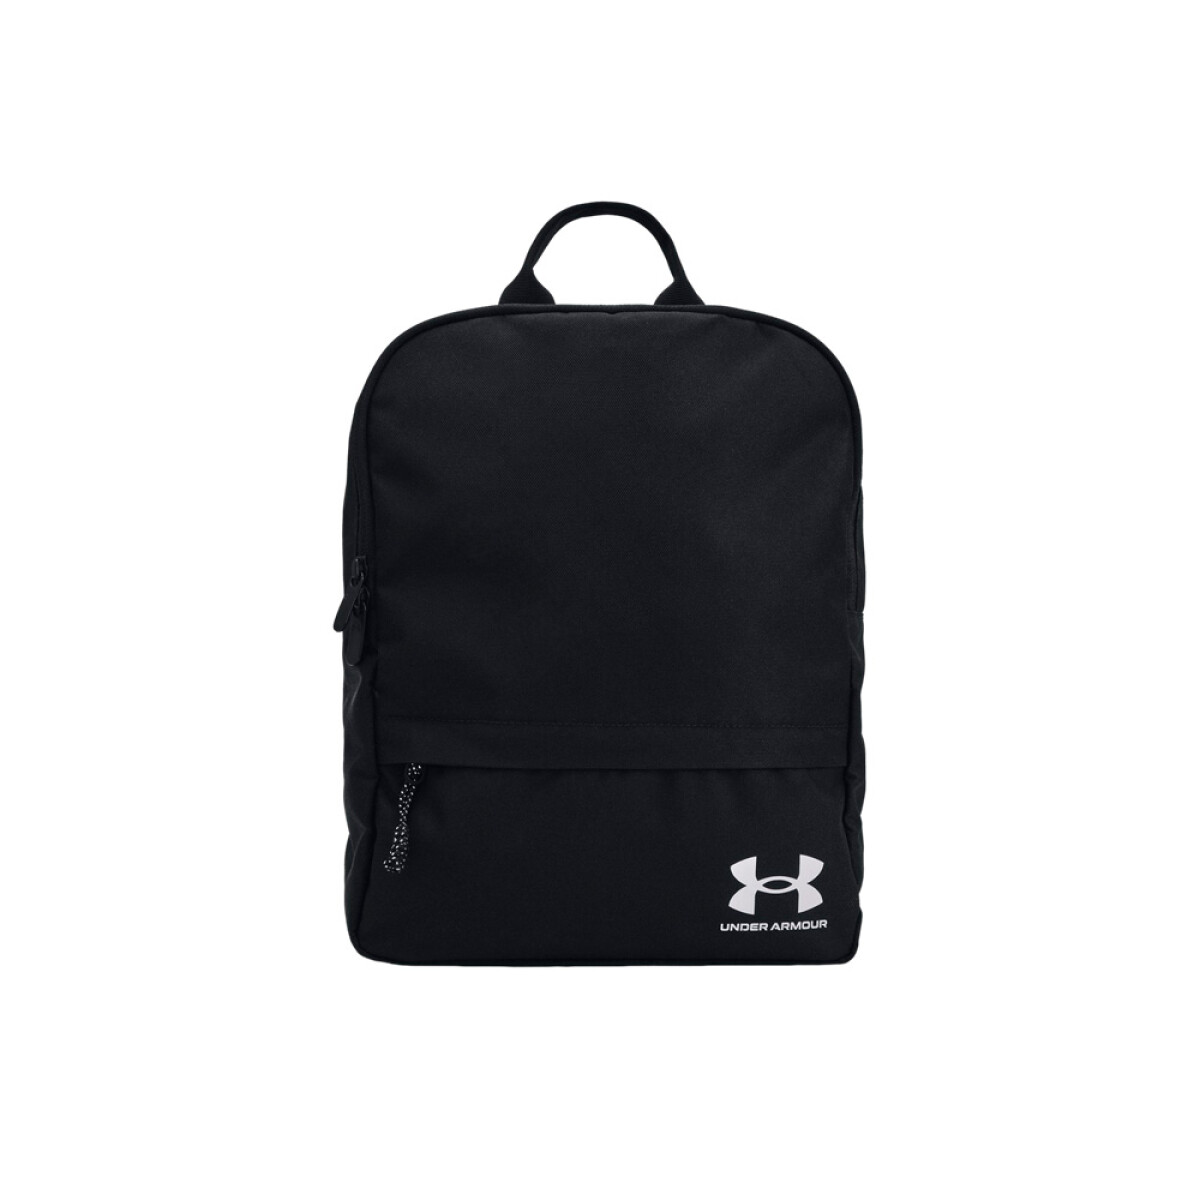 MOCHILA UNDER ARMOUR LOUDON BACKPACK SMALL - Black 